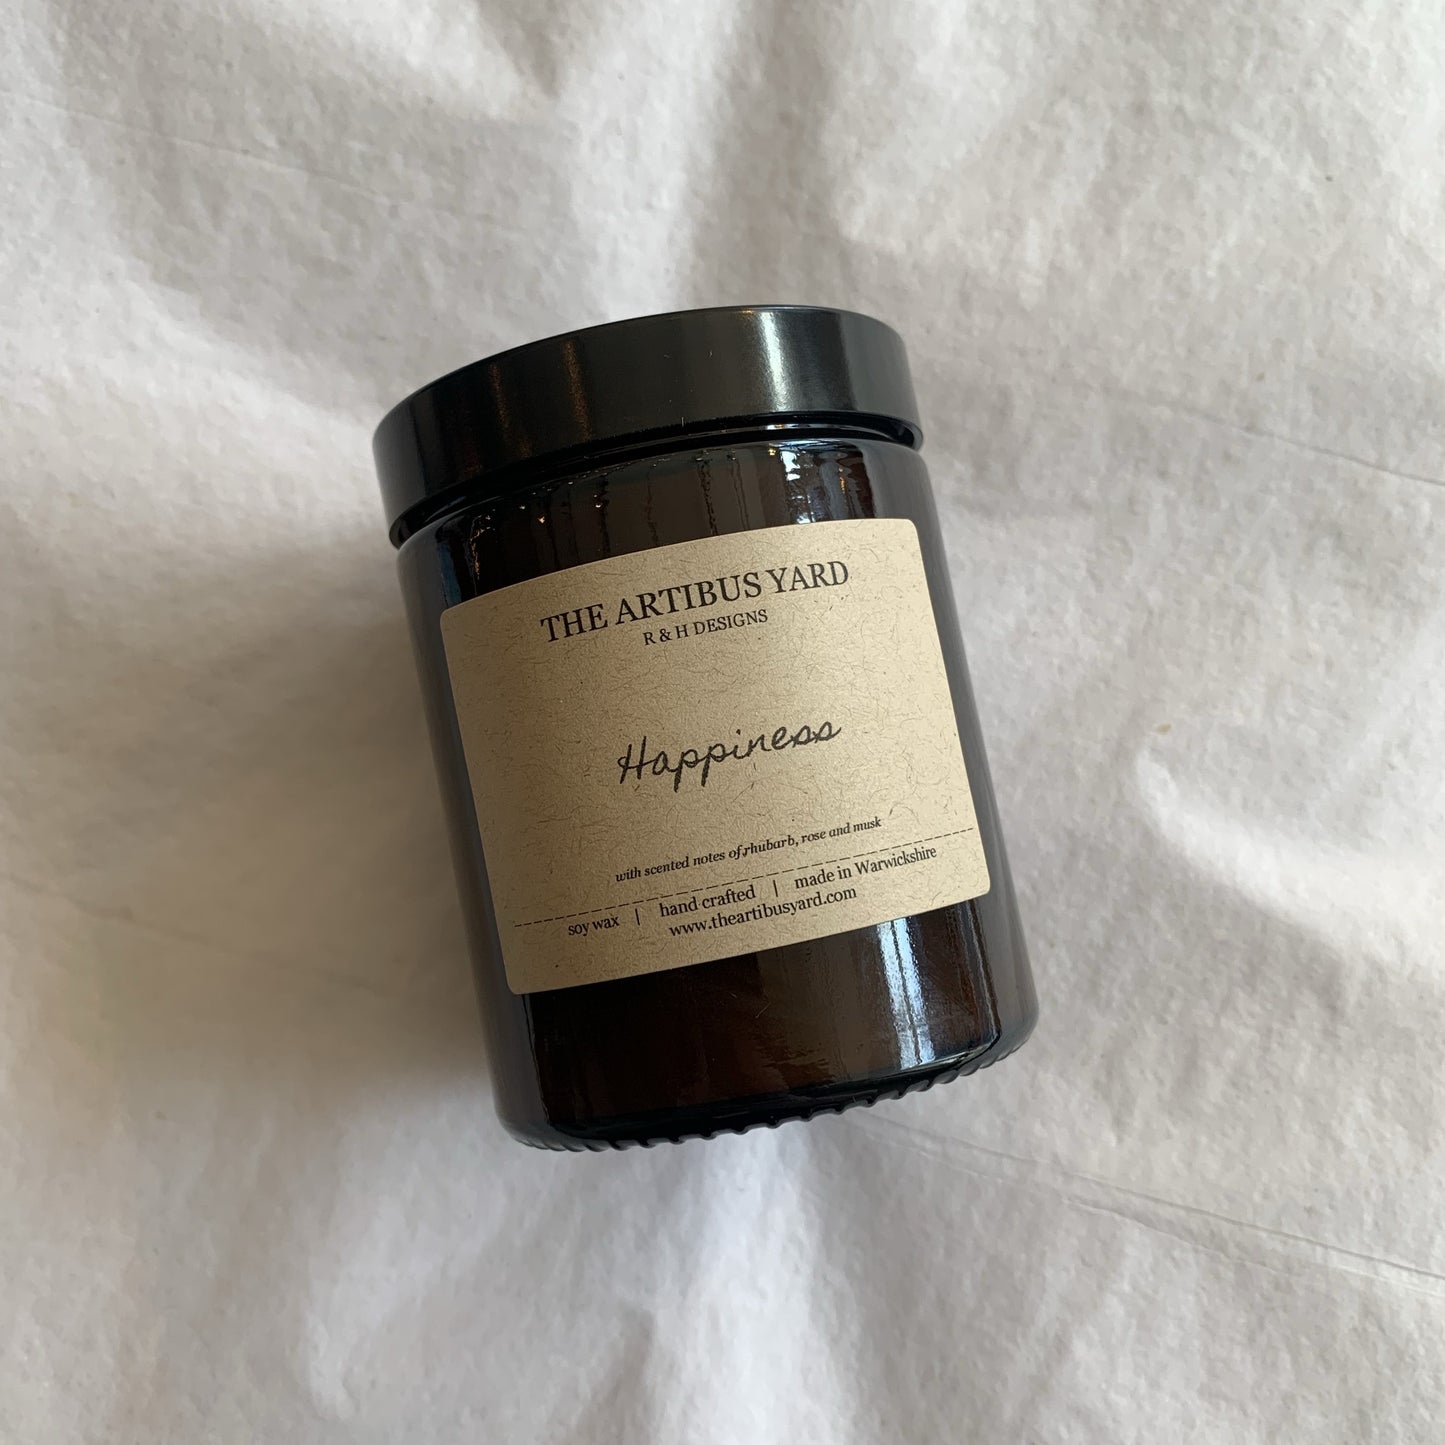 Happiness, Jar Soy Wax Candle